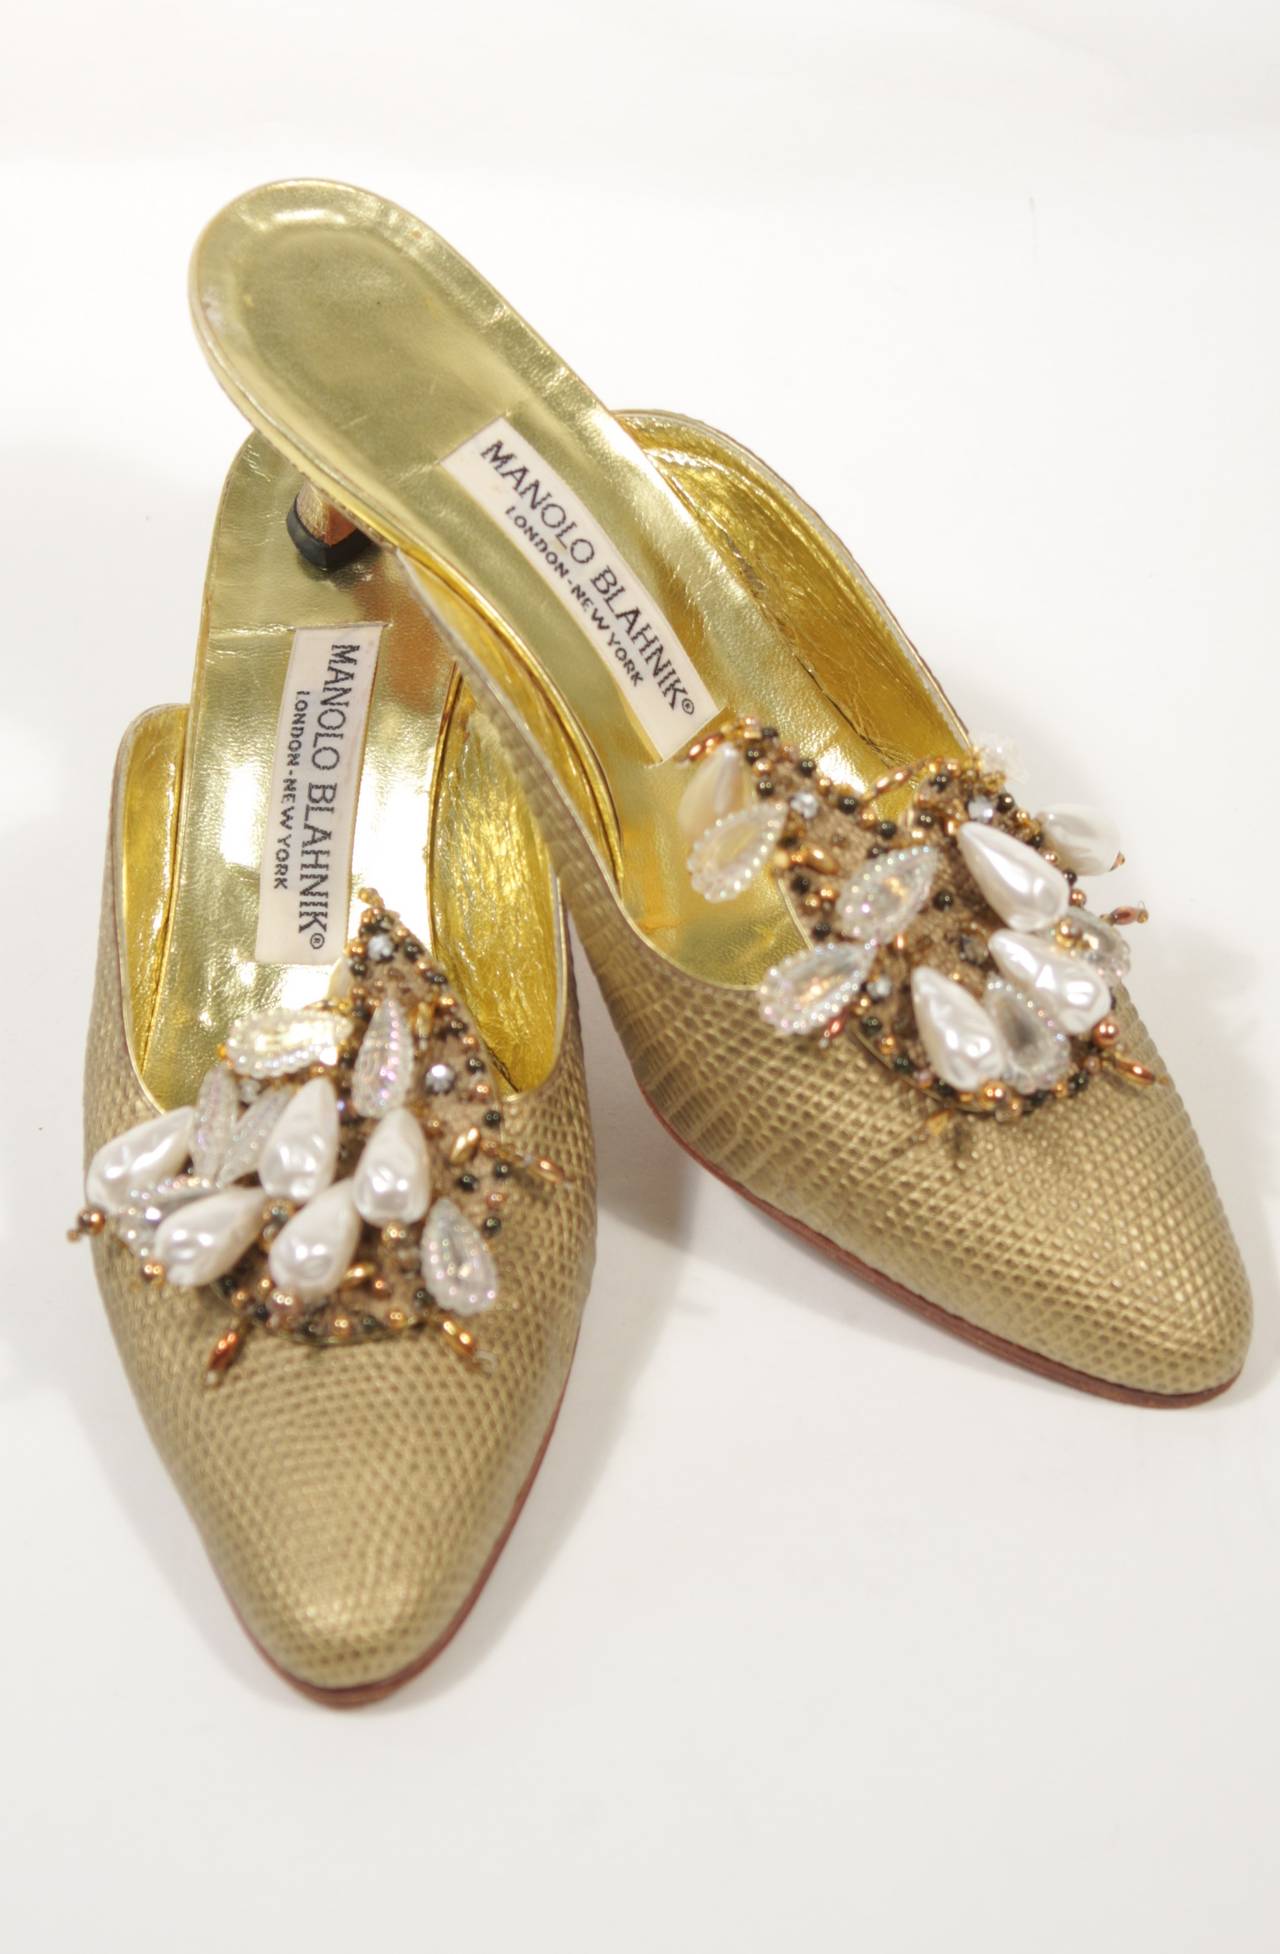 Manolo Blahnik Baroque Gold Tone Heels with Pearl and Bead Details Size 7 2